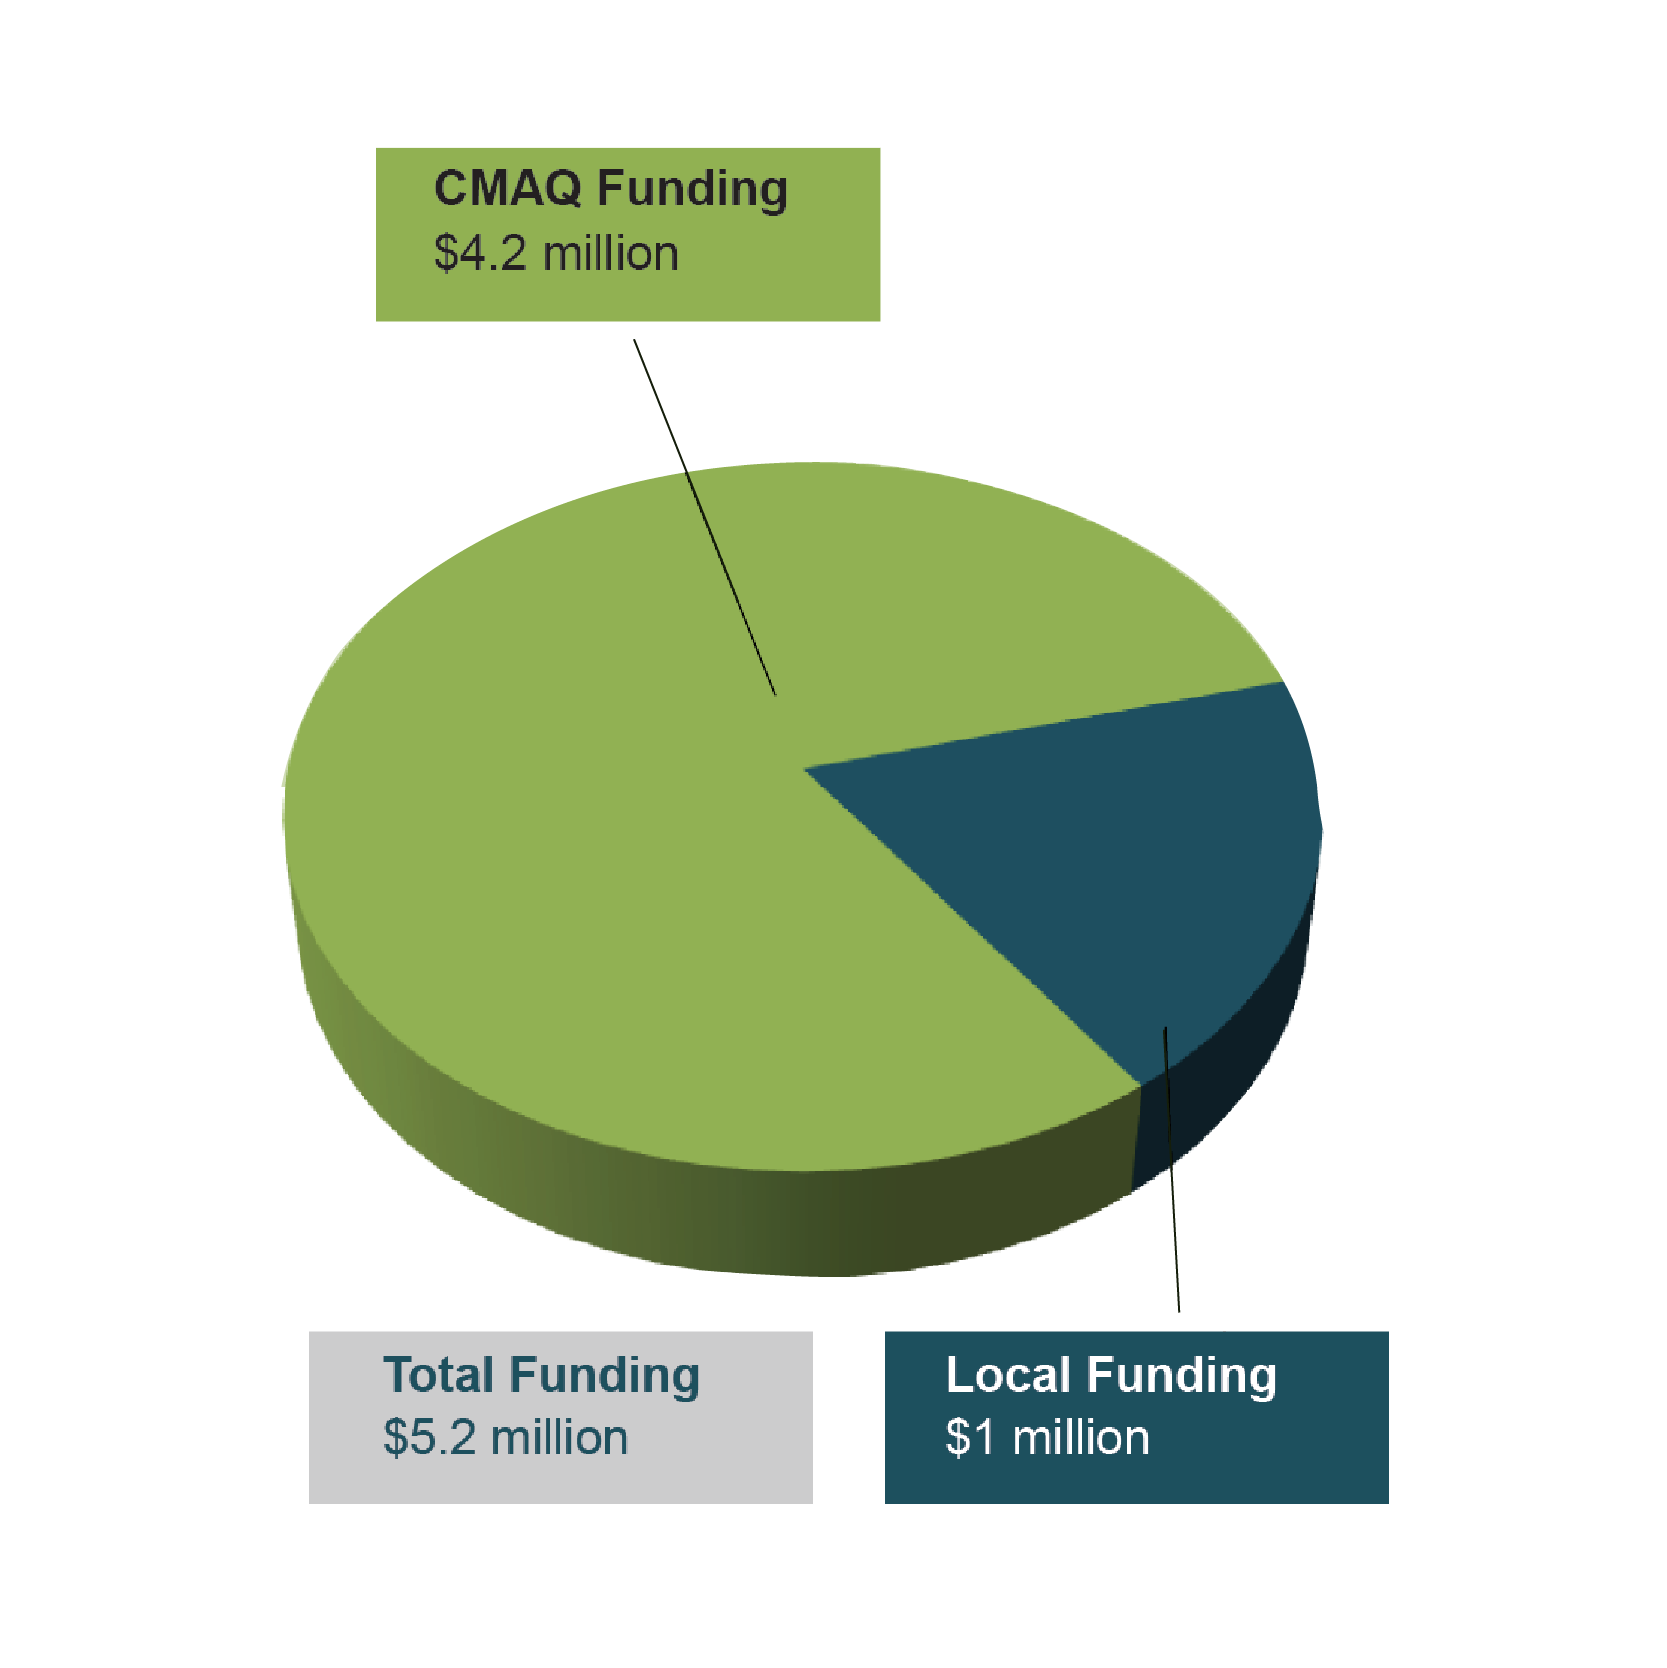 This pie chart shows $4.2 million CMAQ funding and $1 million local funding as a proportion of the total $5.2 million project funding.